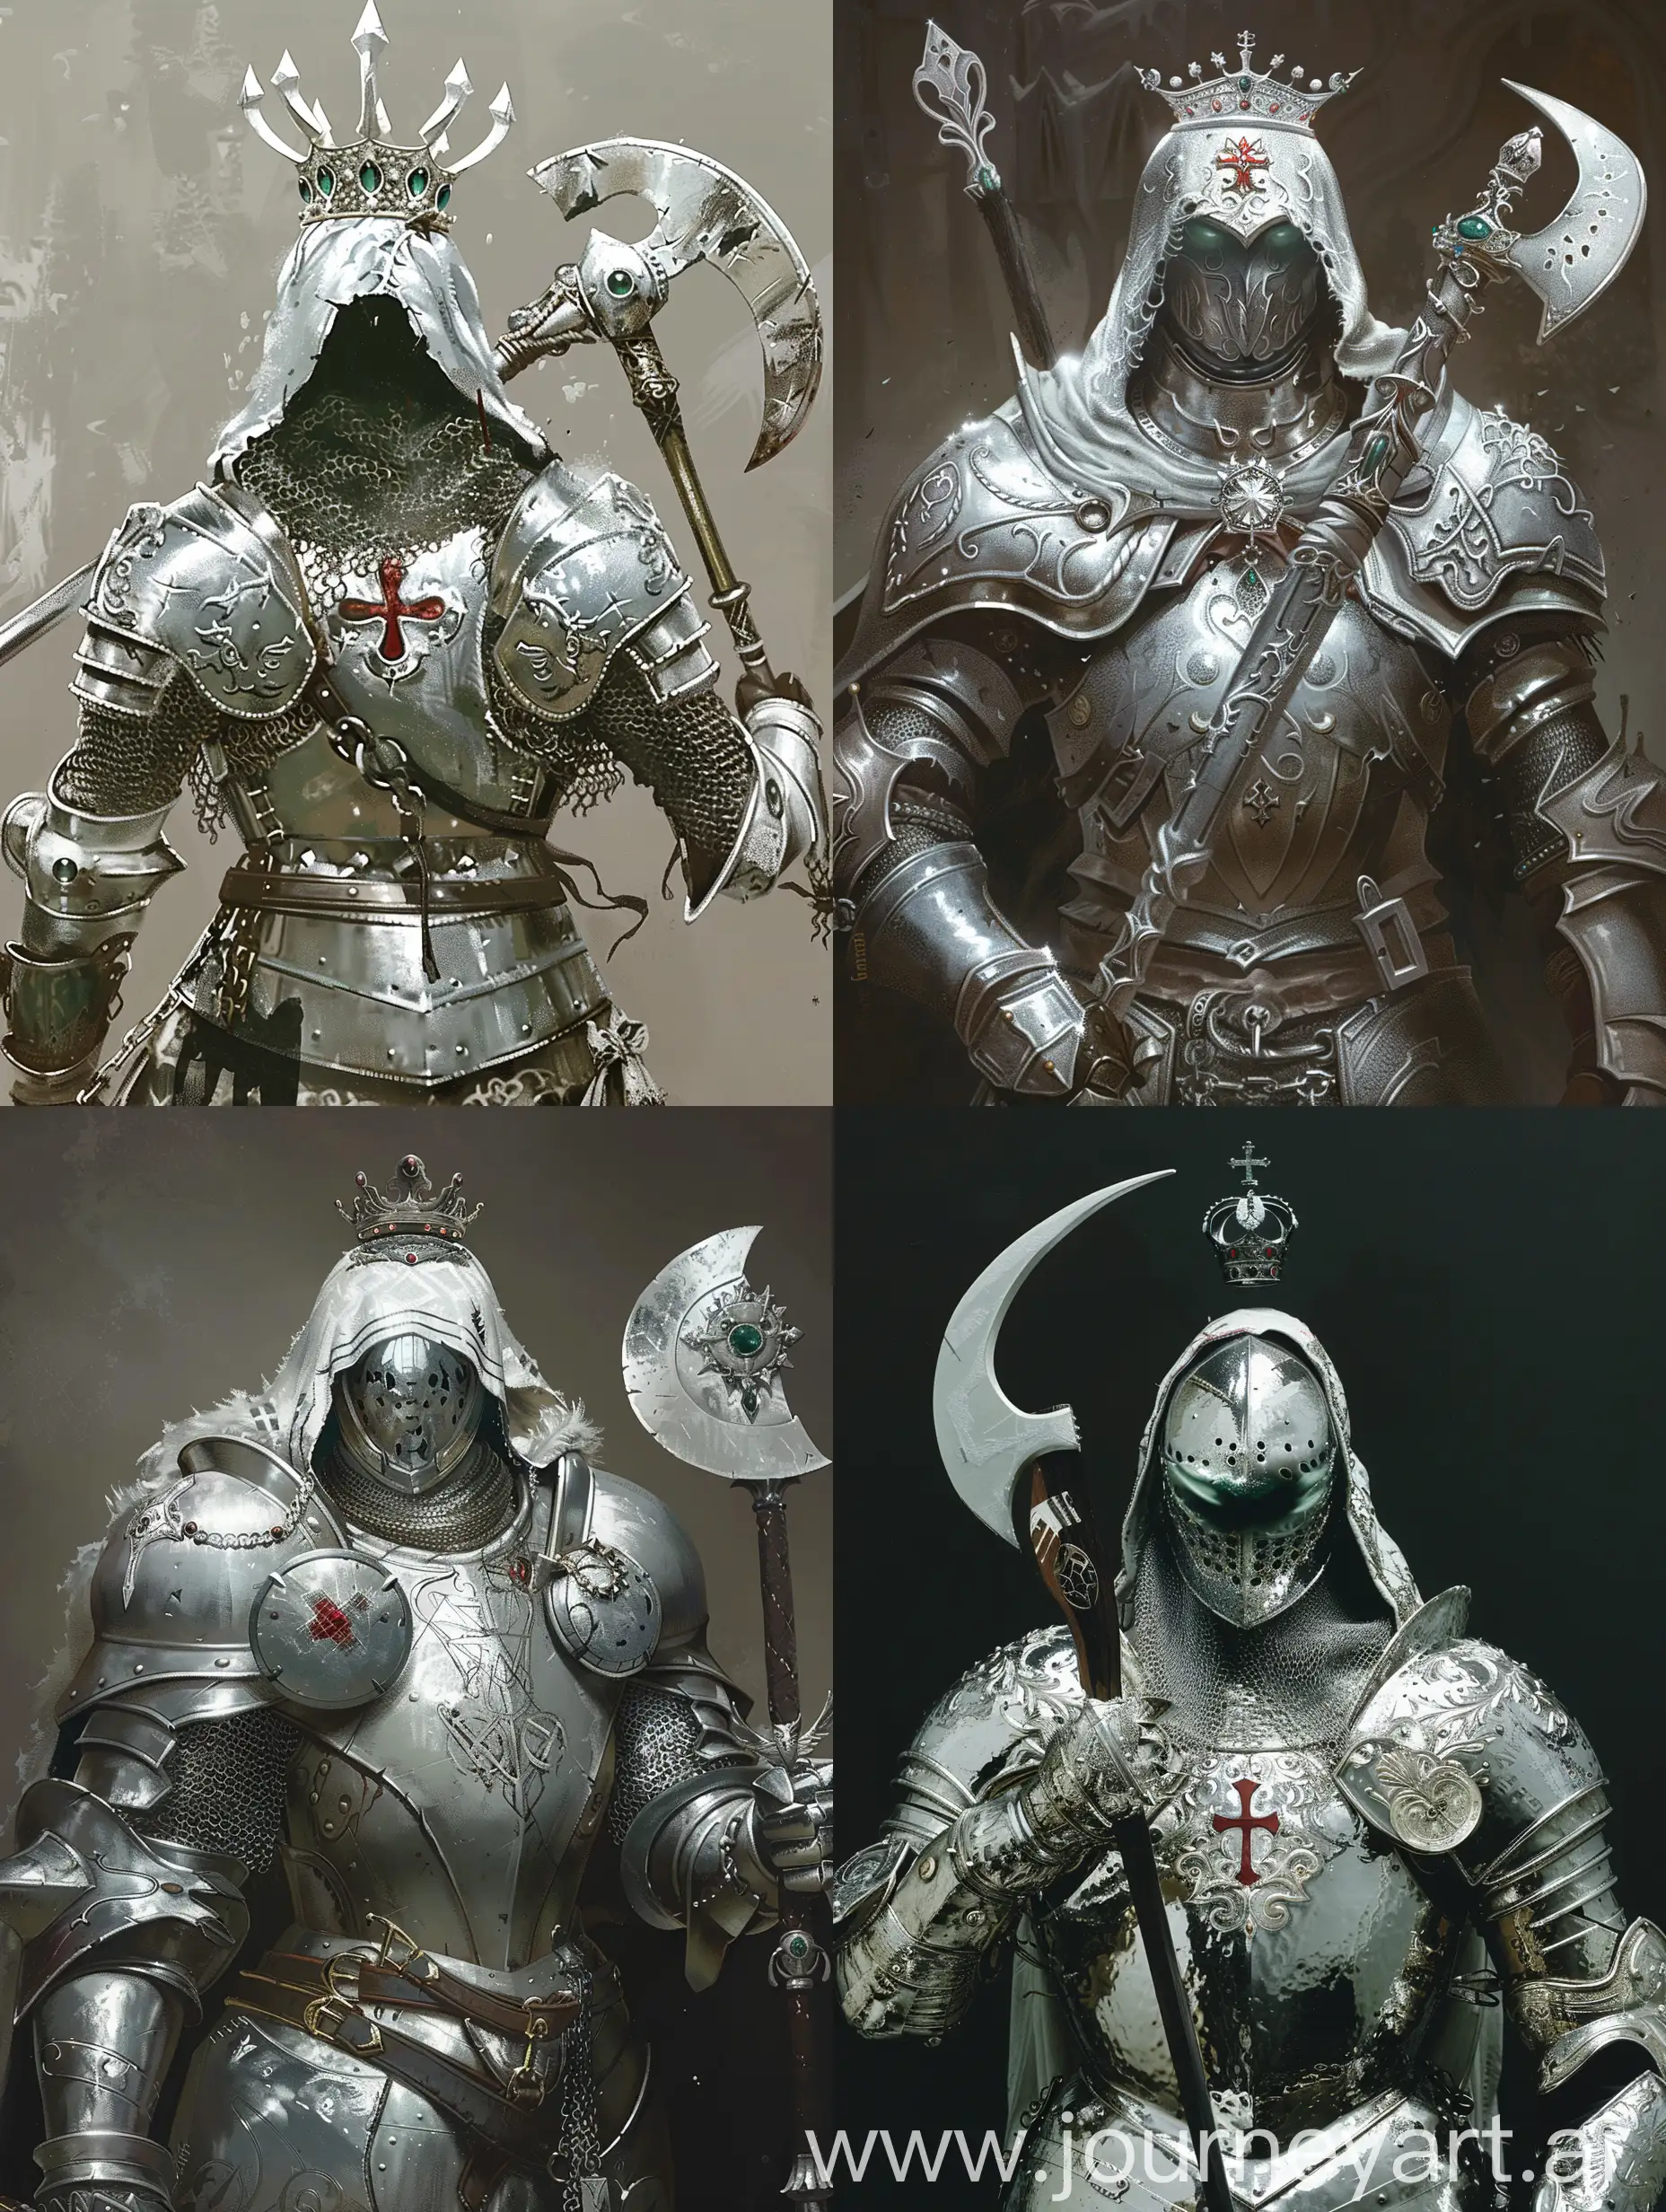 Silver-Armored-Knight-with-Semicircular-Axe-and-Sword-Facing-Unknown-Creature